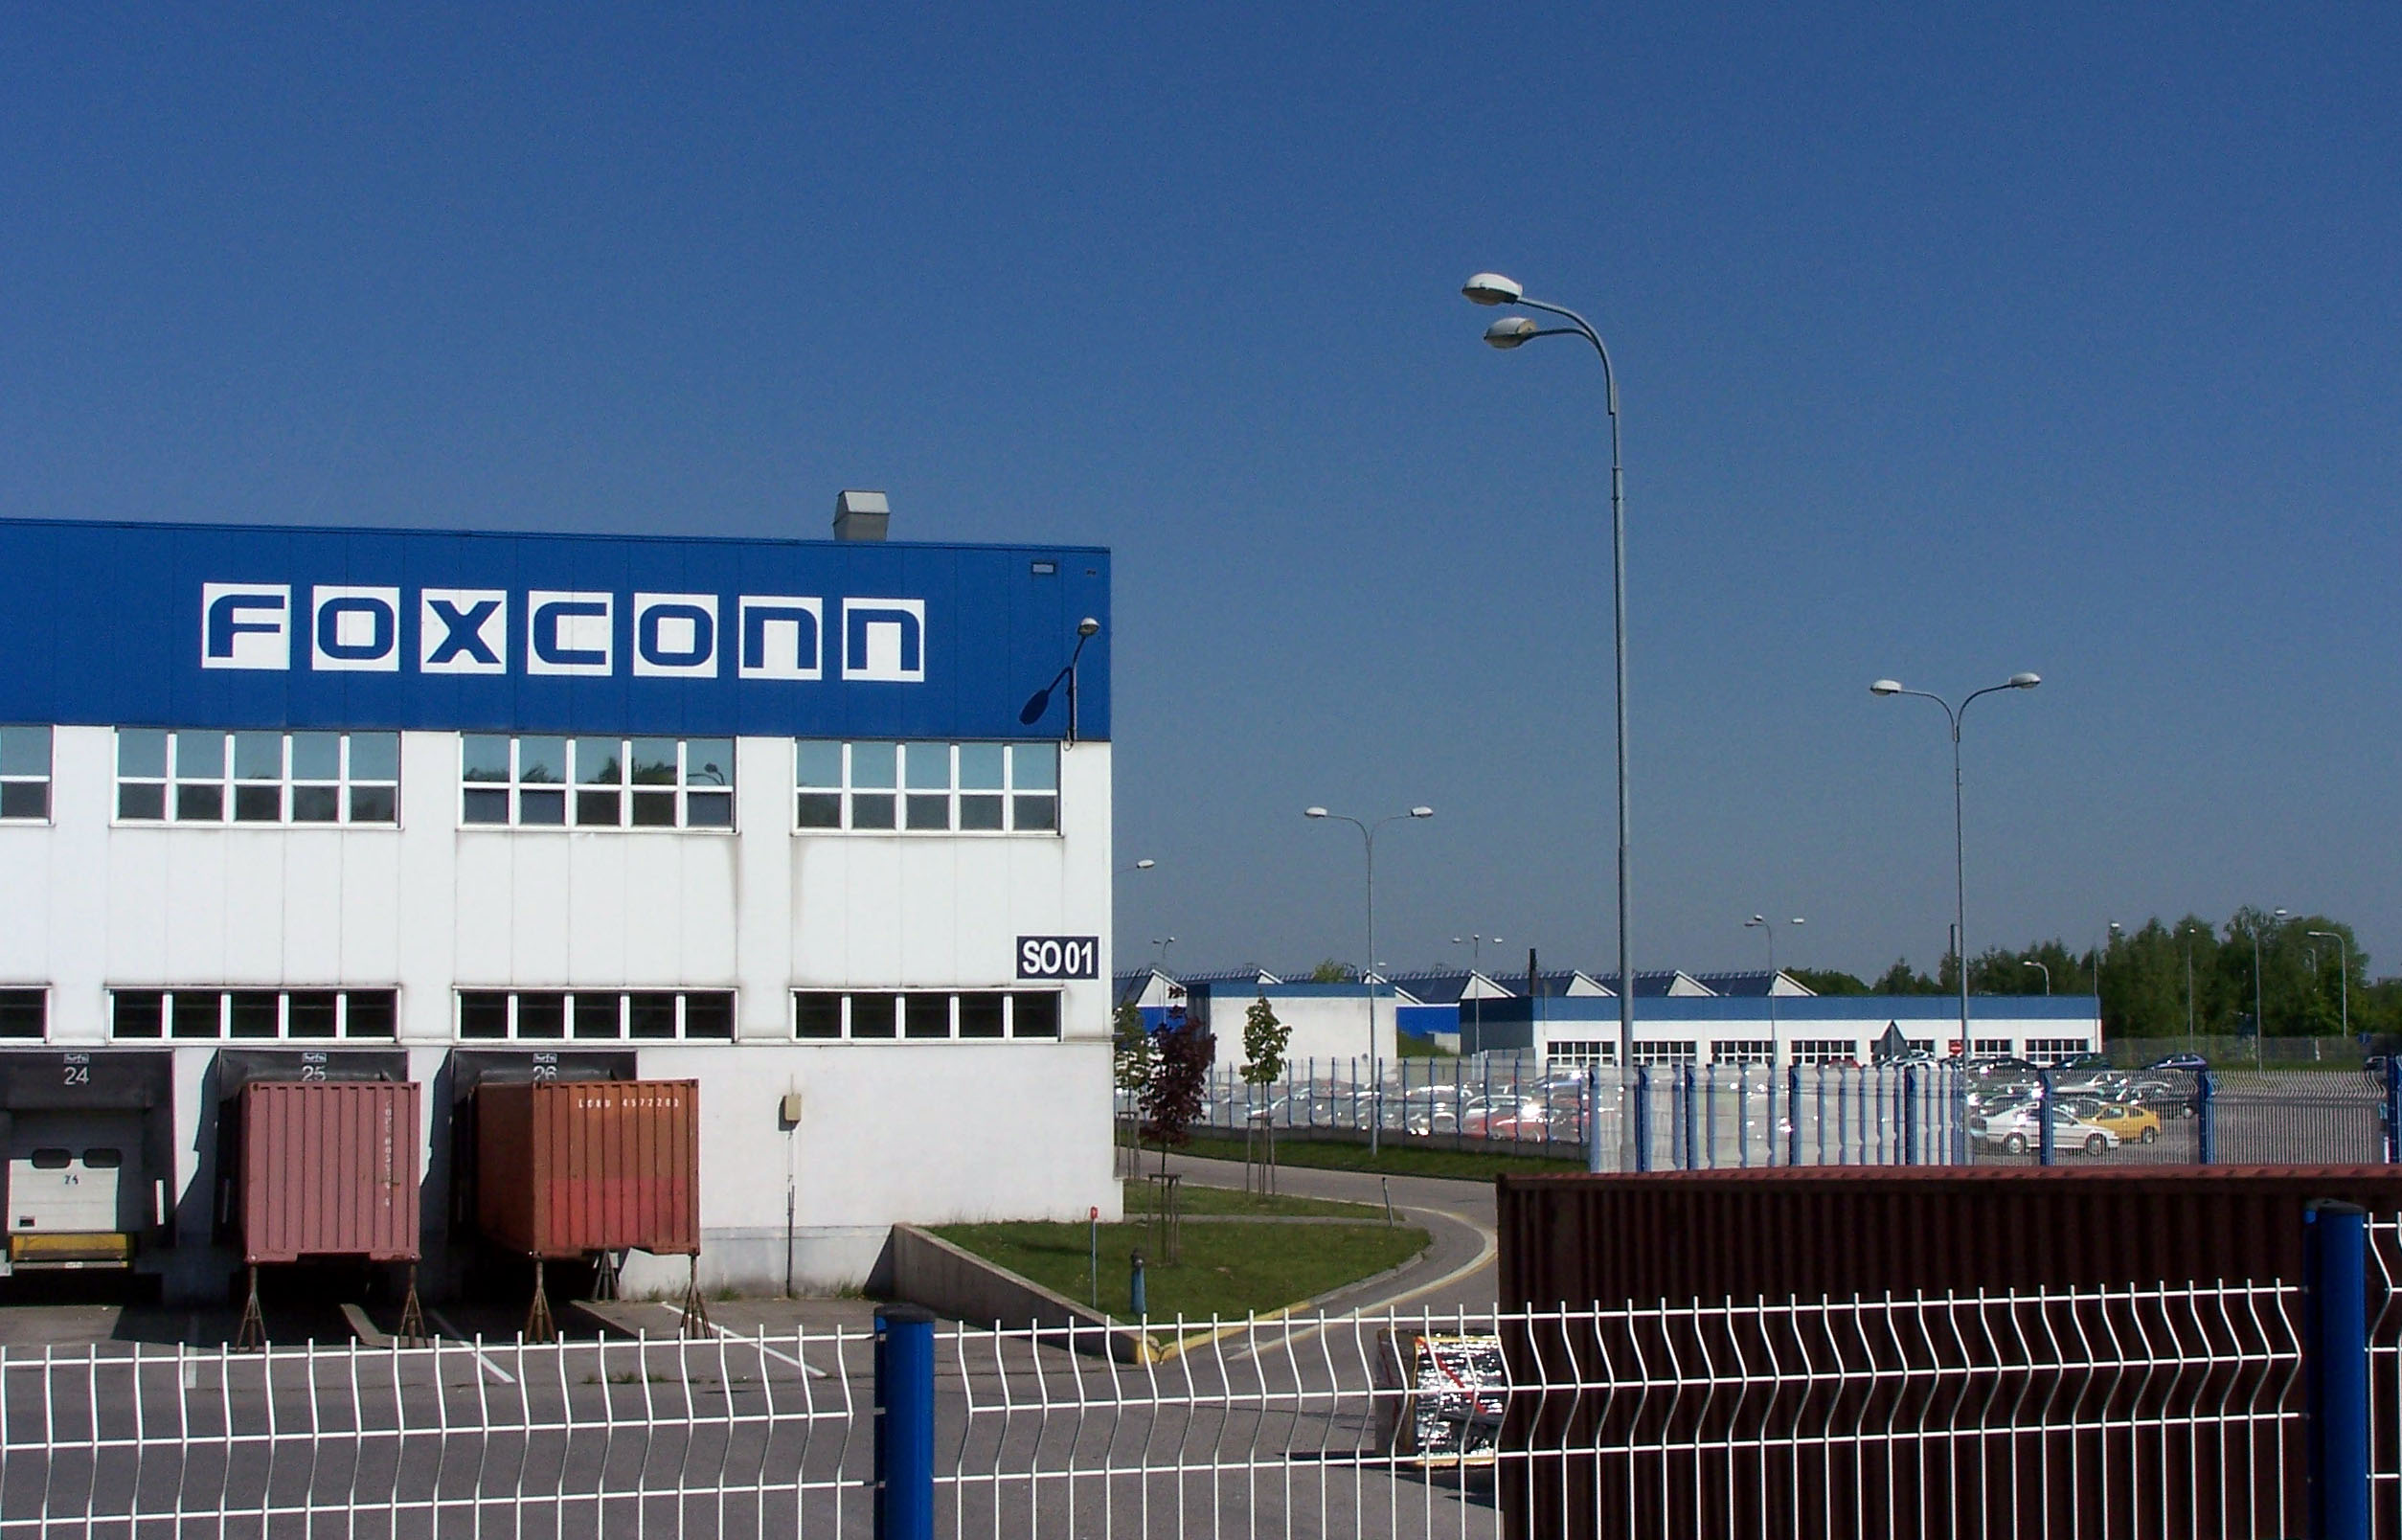 Foxconn: There's a technological war between the US and China